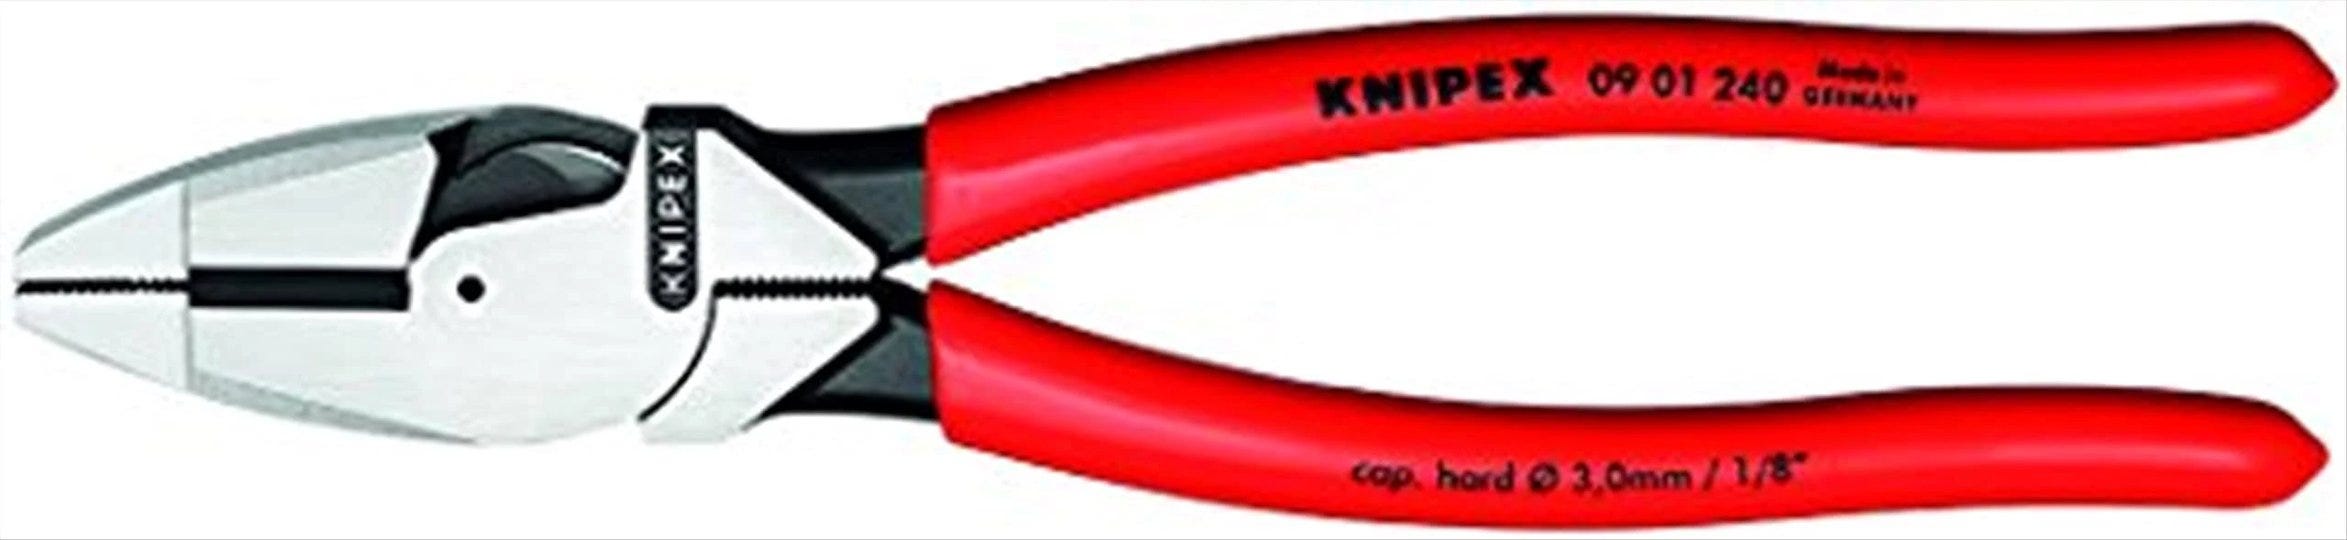 knipex-0901240sba-high-leverage-linesman-pliers-1